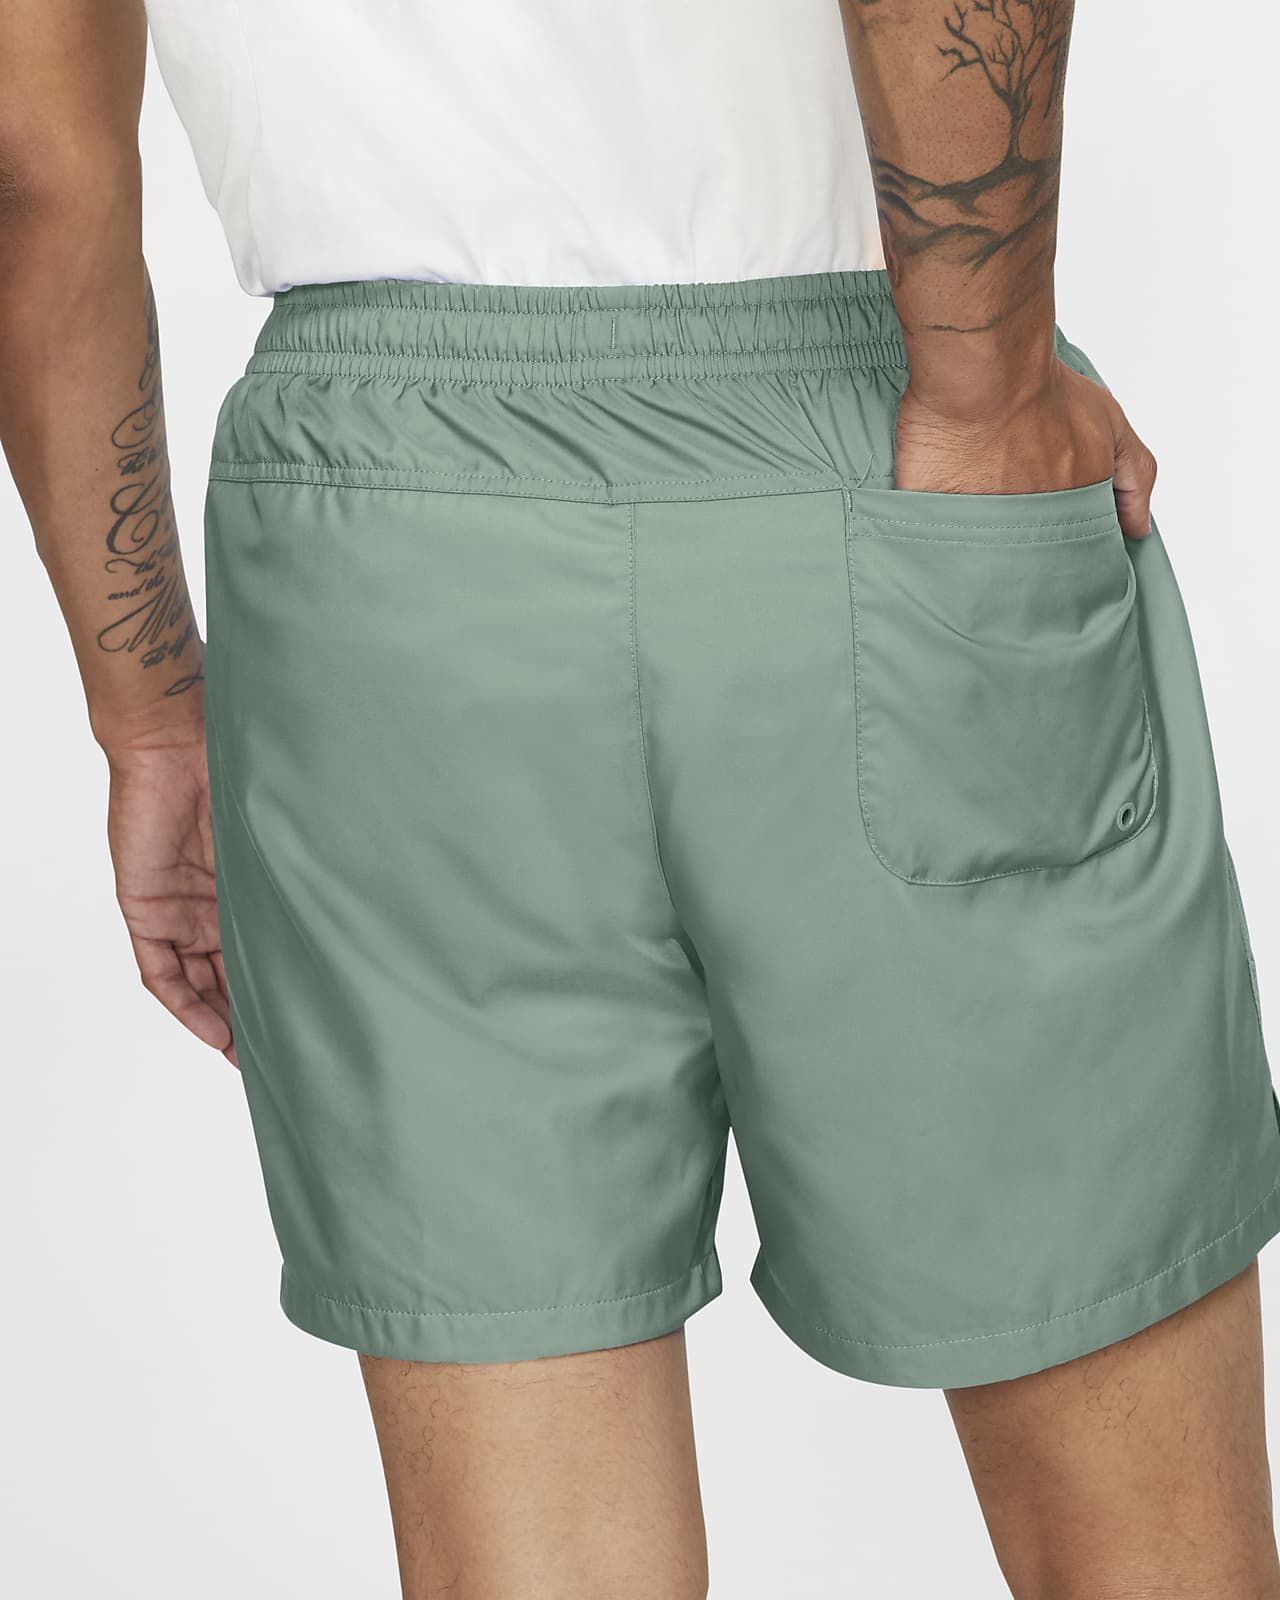 Buy > mens nike woven flow shorts > in stock